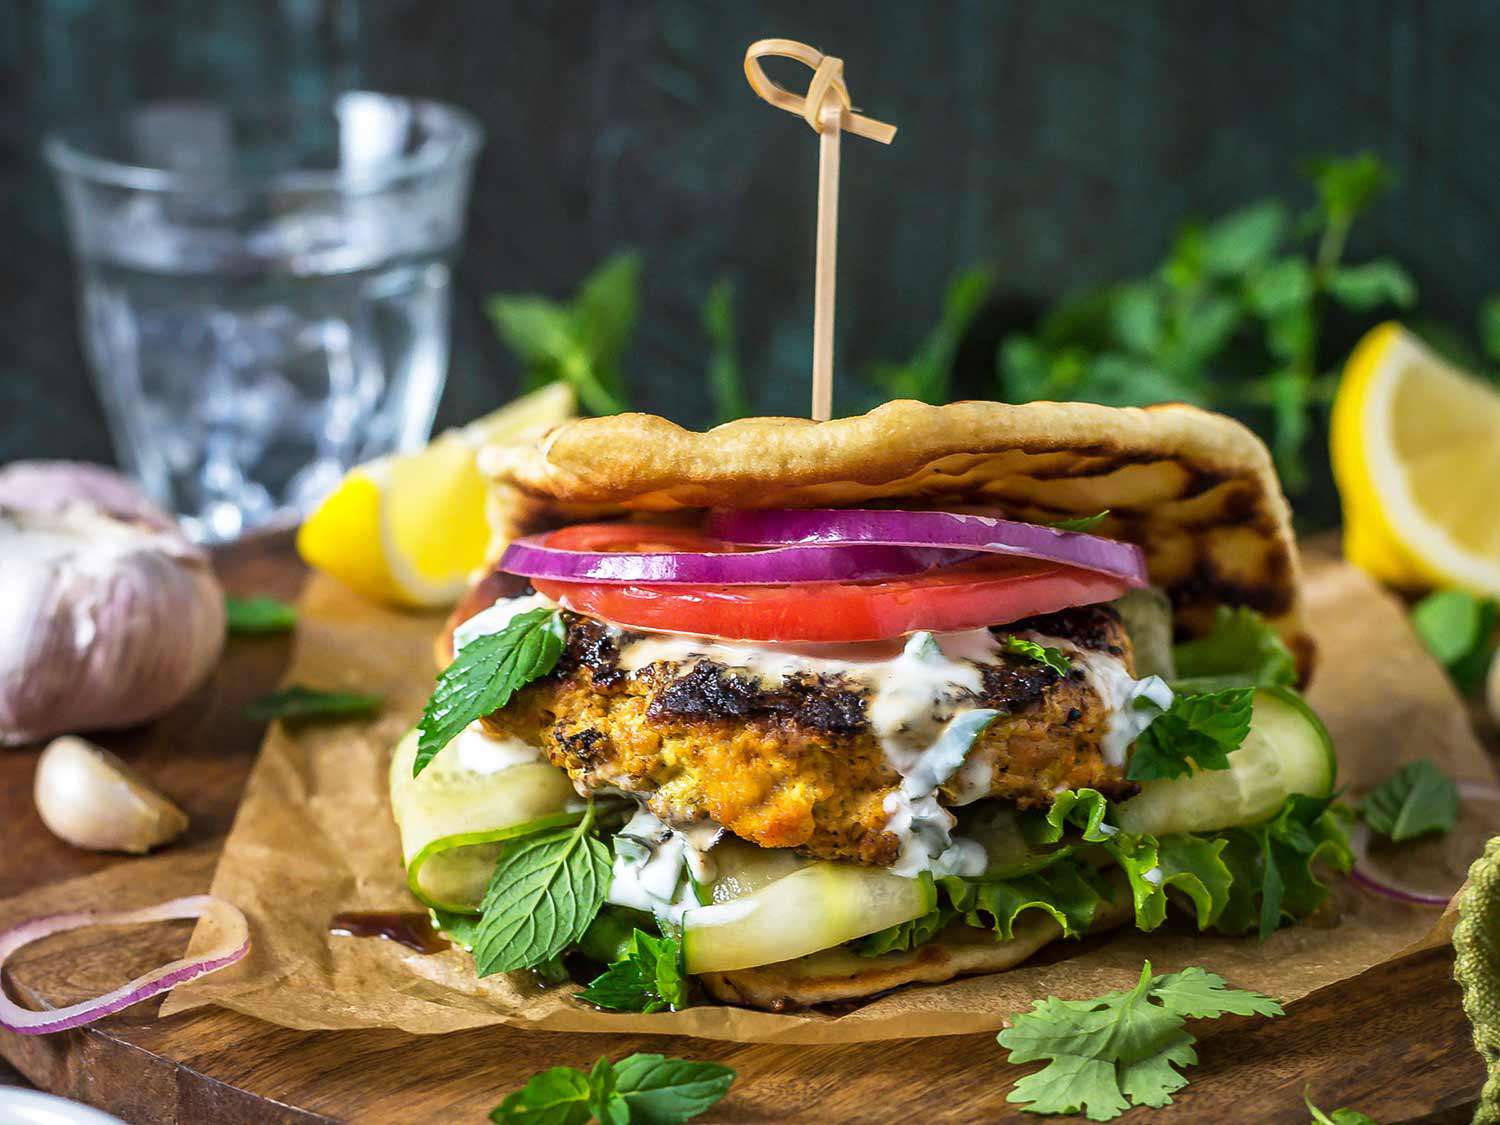 Grilled tandoori chicken patties sandwiched with grilled naan yogurt sauce, red onion, tomato, cucumber, and herbs